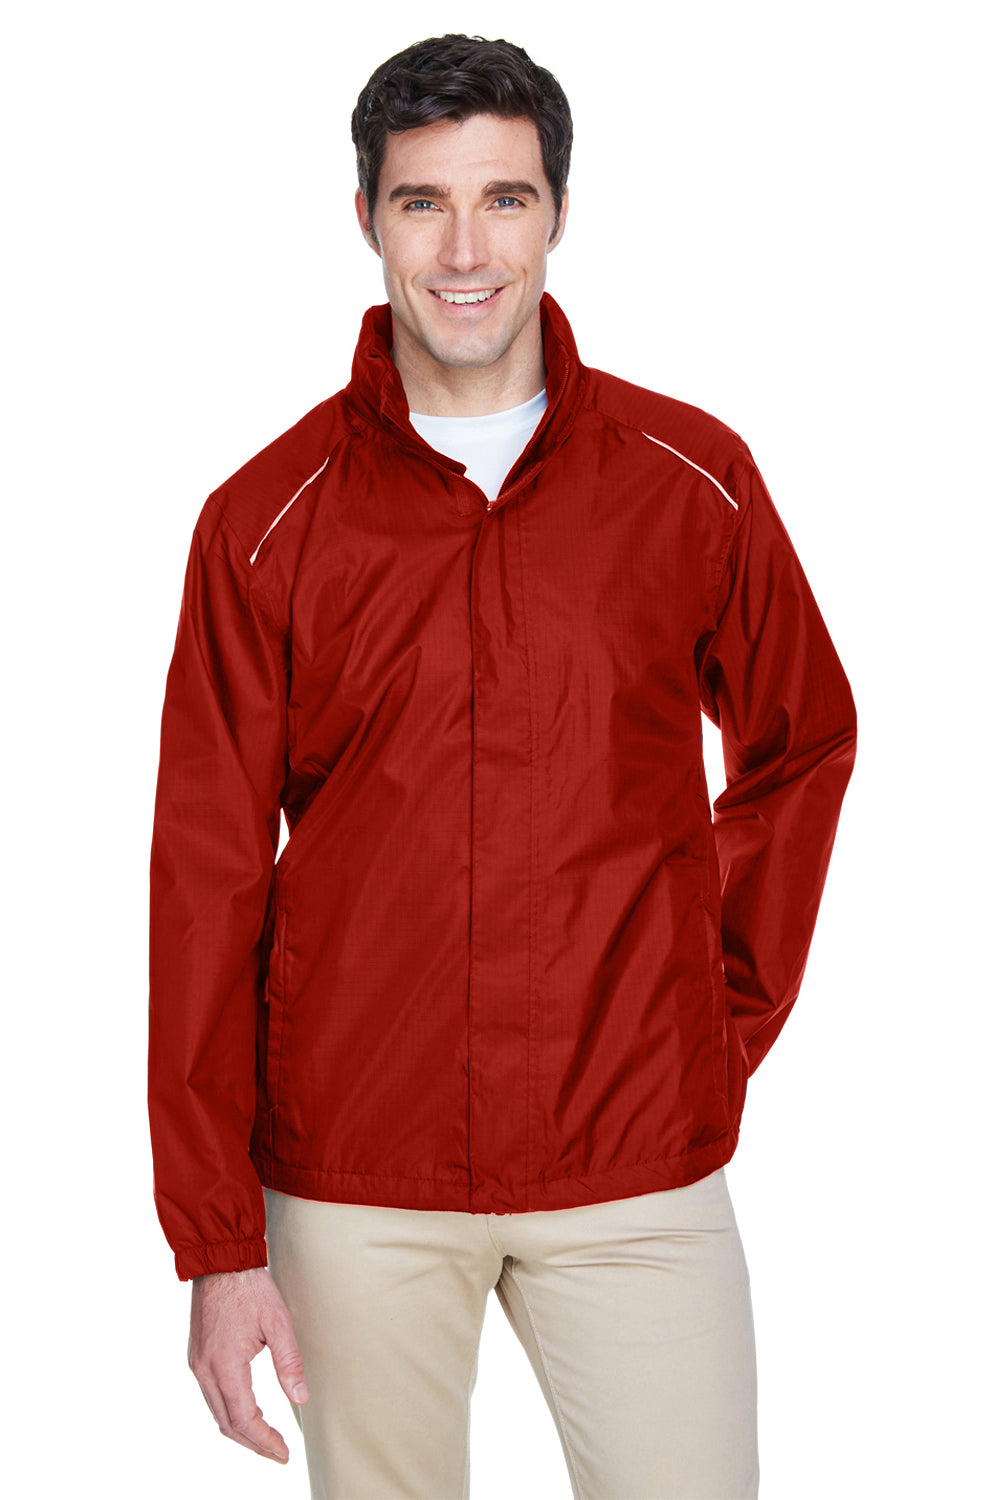 Core 365 88185 Mens Climate Waterproof Full Zip Hooded Jacket Red Front